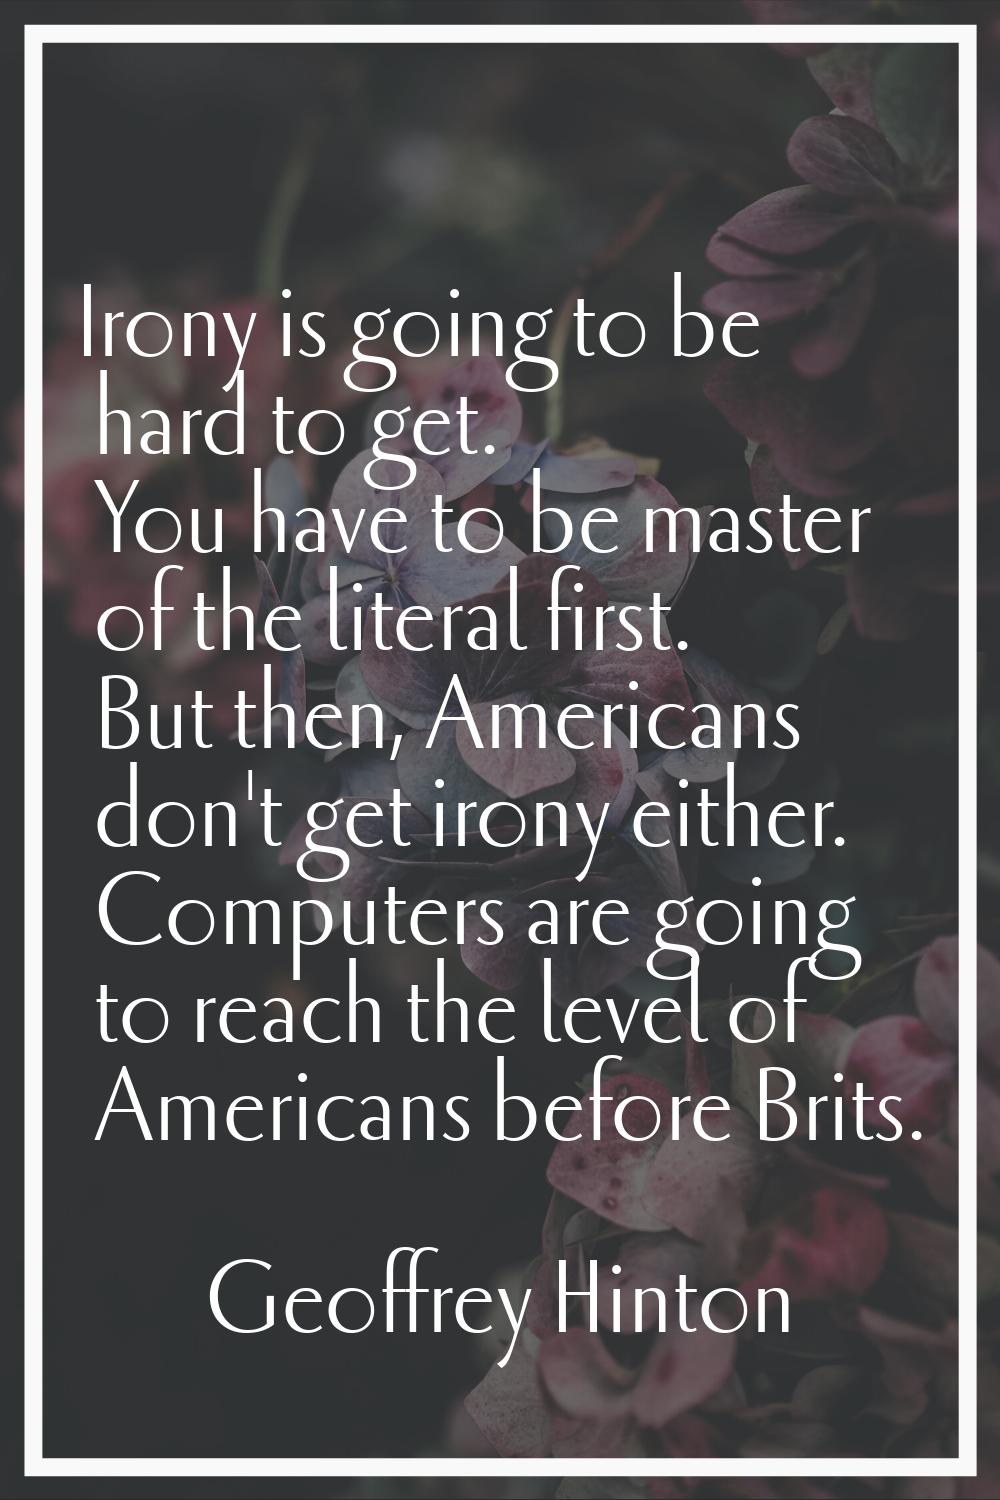 Irony is going to be hard to get. You have to be master of the literal first. But then, Americans d